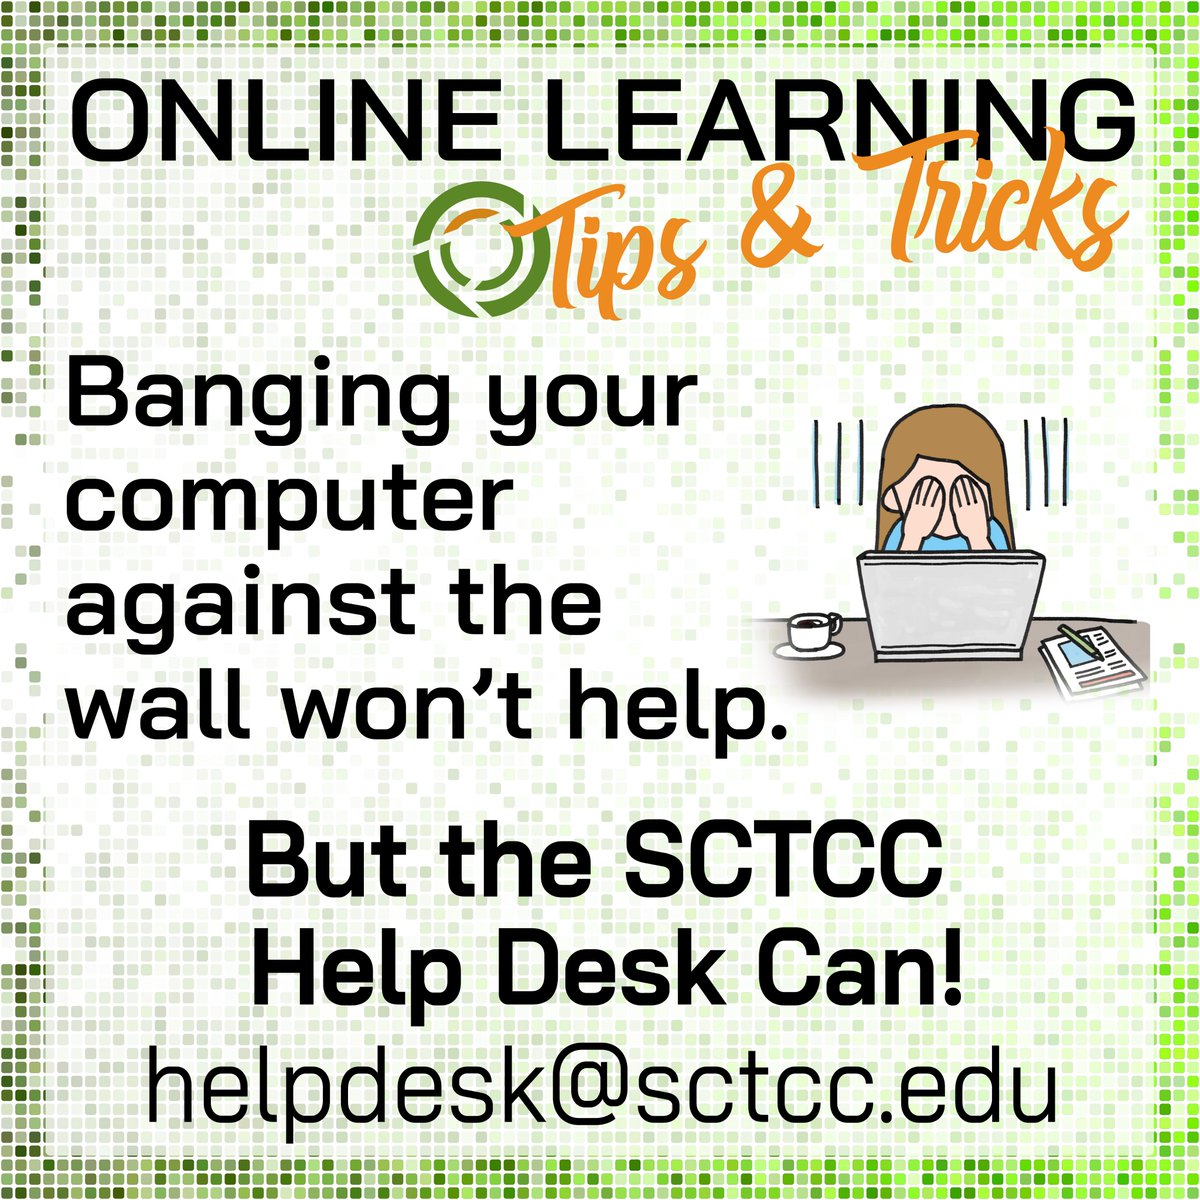 Sctcc On Twitter The Sctcc Help Desk Is Always Ready To Help You